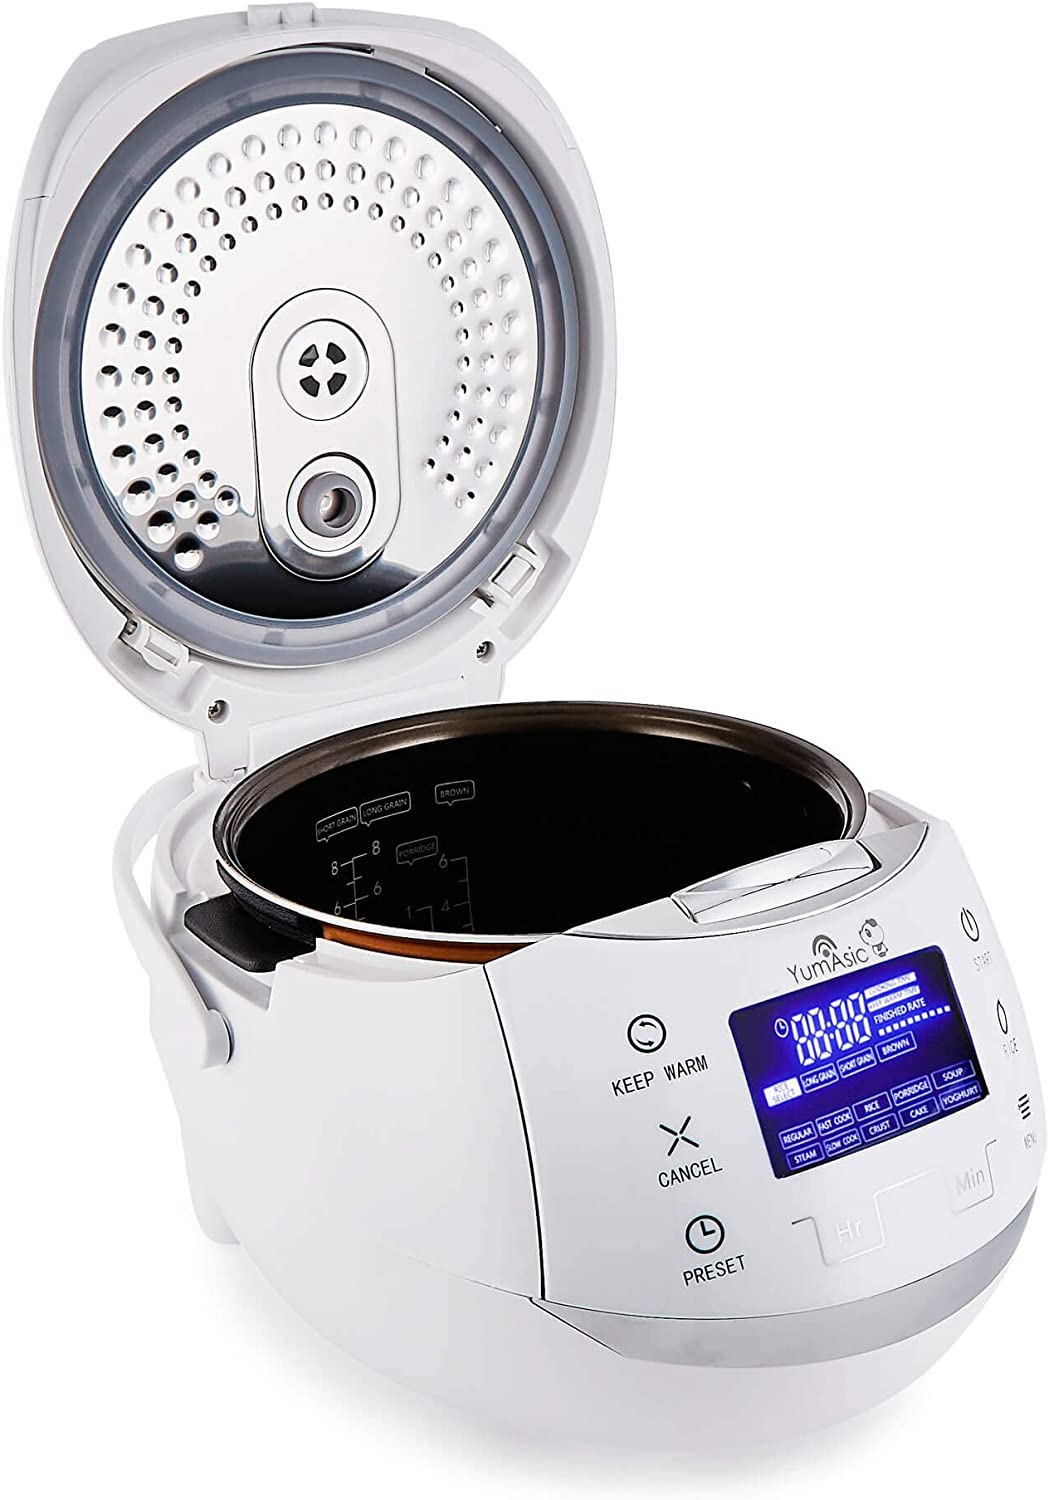 https://discounttoday.net/wp-content/uploads/2023/07/Yum-Asia-Sakura-Rice-Cooker-with-Ceramic-Bowl-and-Advanced-Fuzzy-Logic-8-Cup-1.5-Litre-6-Rice-Cook-Functions-White-and-Siver-5.jpg